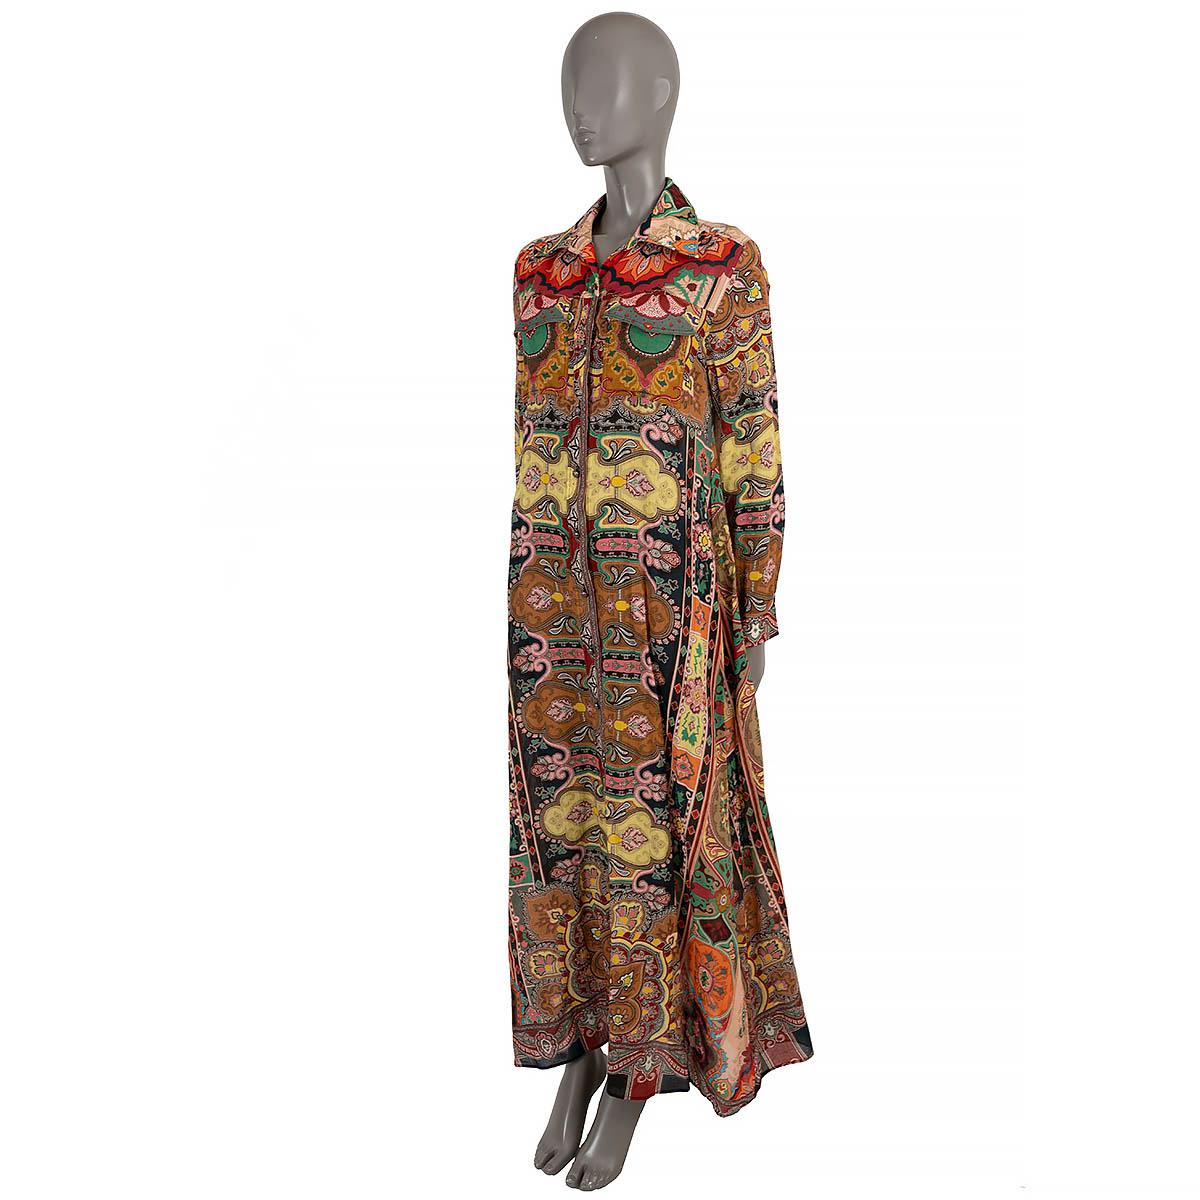 100% authentic Etro paisley shirt dress in earthy multicolor semi-sheer crepe cotton (100%). Features two flap pockets at the chest and two slit pockets at the waist. Unlined. Has been worn and is in excellent condition.

2022